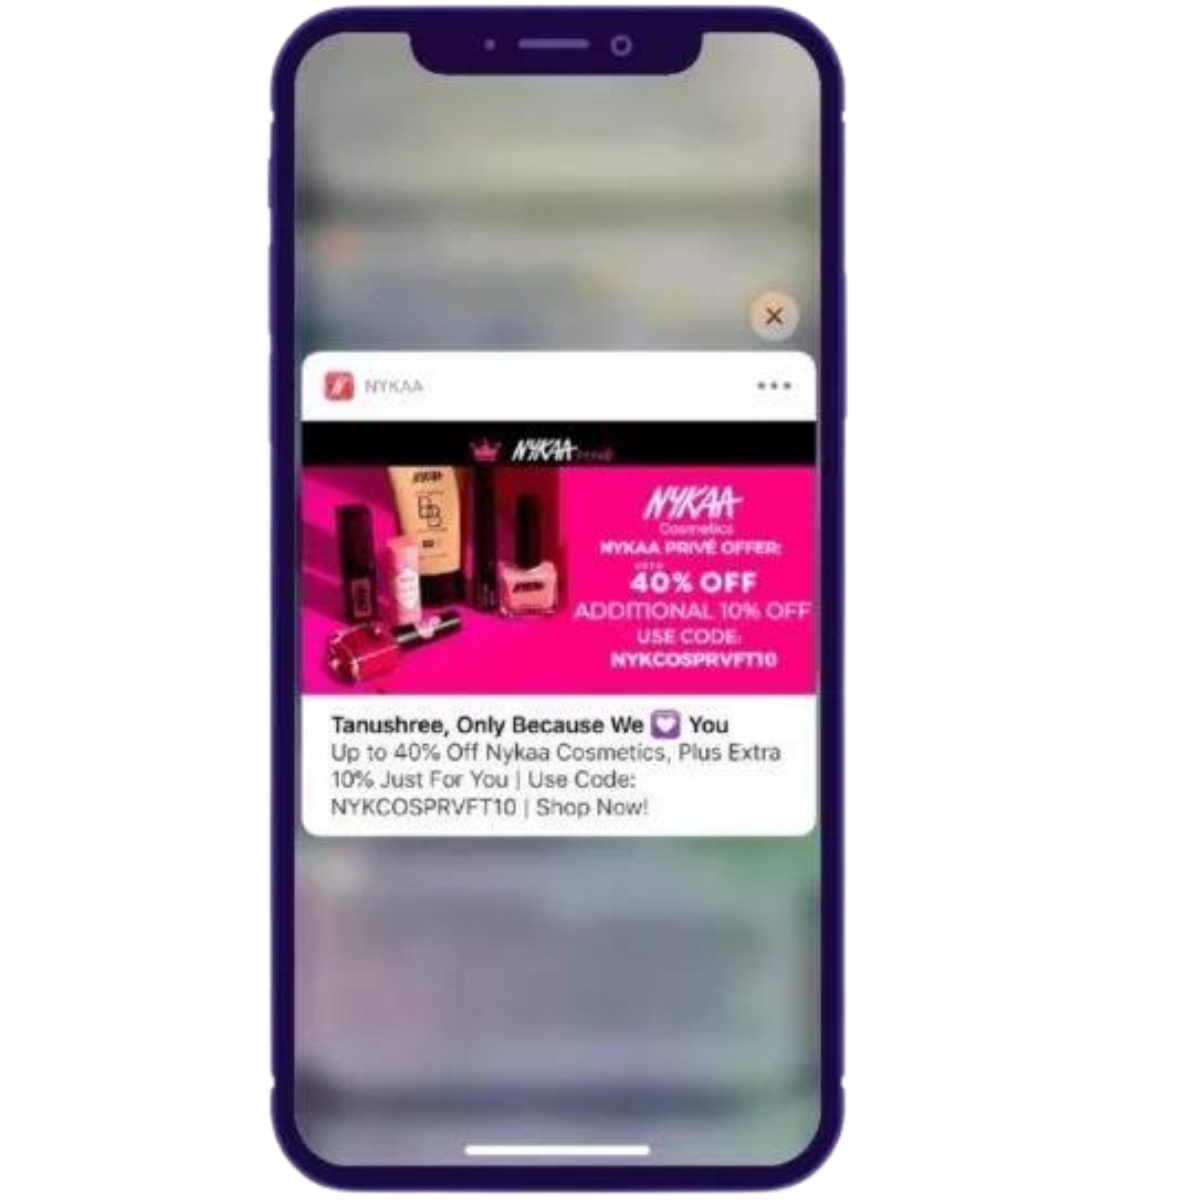 Nykaa push notification image - App Retention Strategies for Retail and D2C